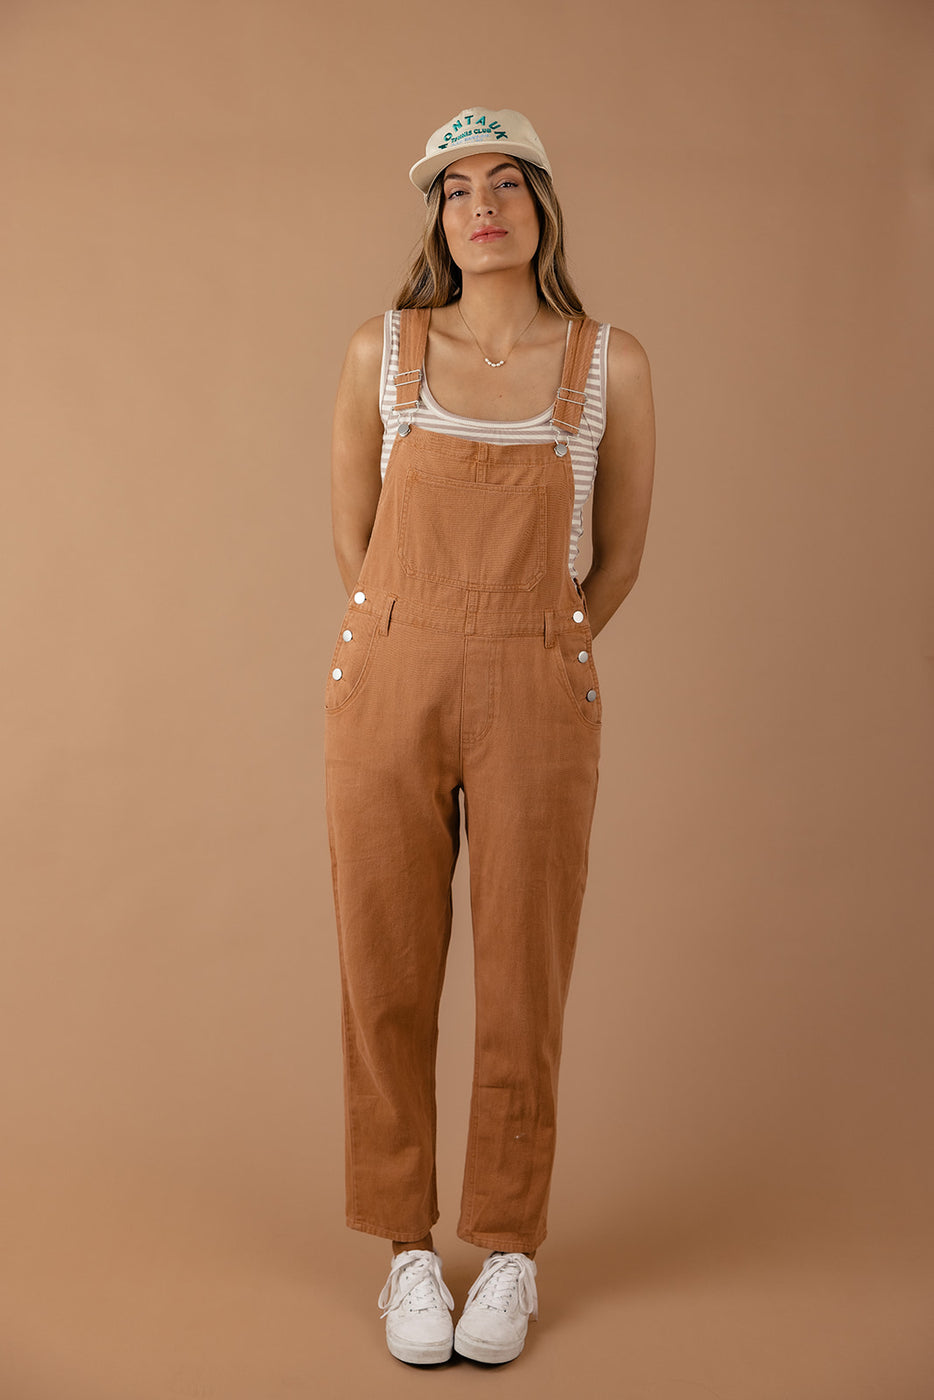 a woman in overalls standing in front of a wall